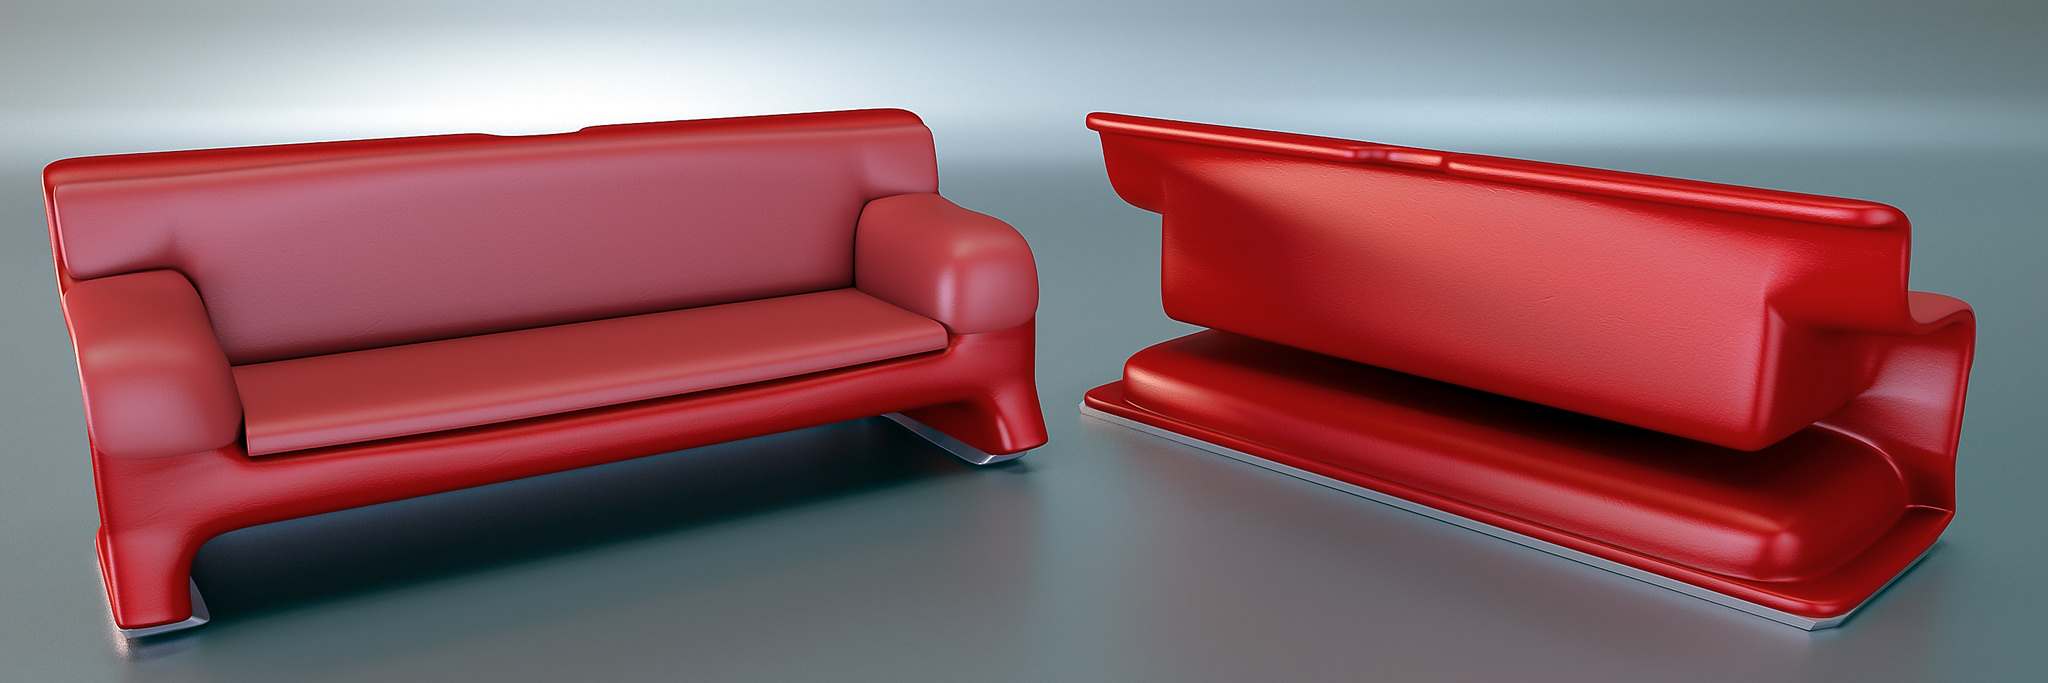 industrialdesign7 Industrial Design Modeled and Rendered in Modo by Mike Grauer